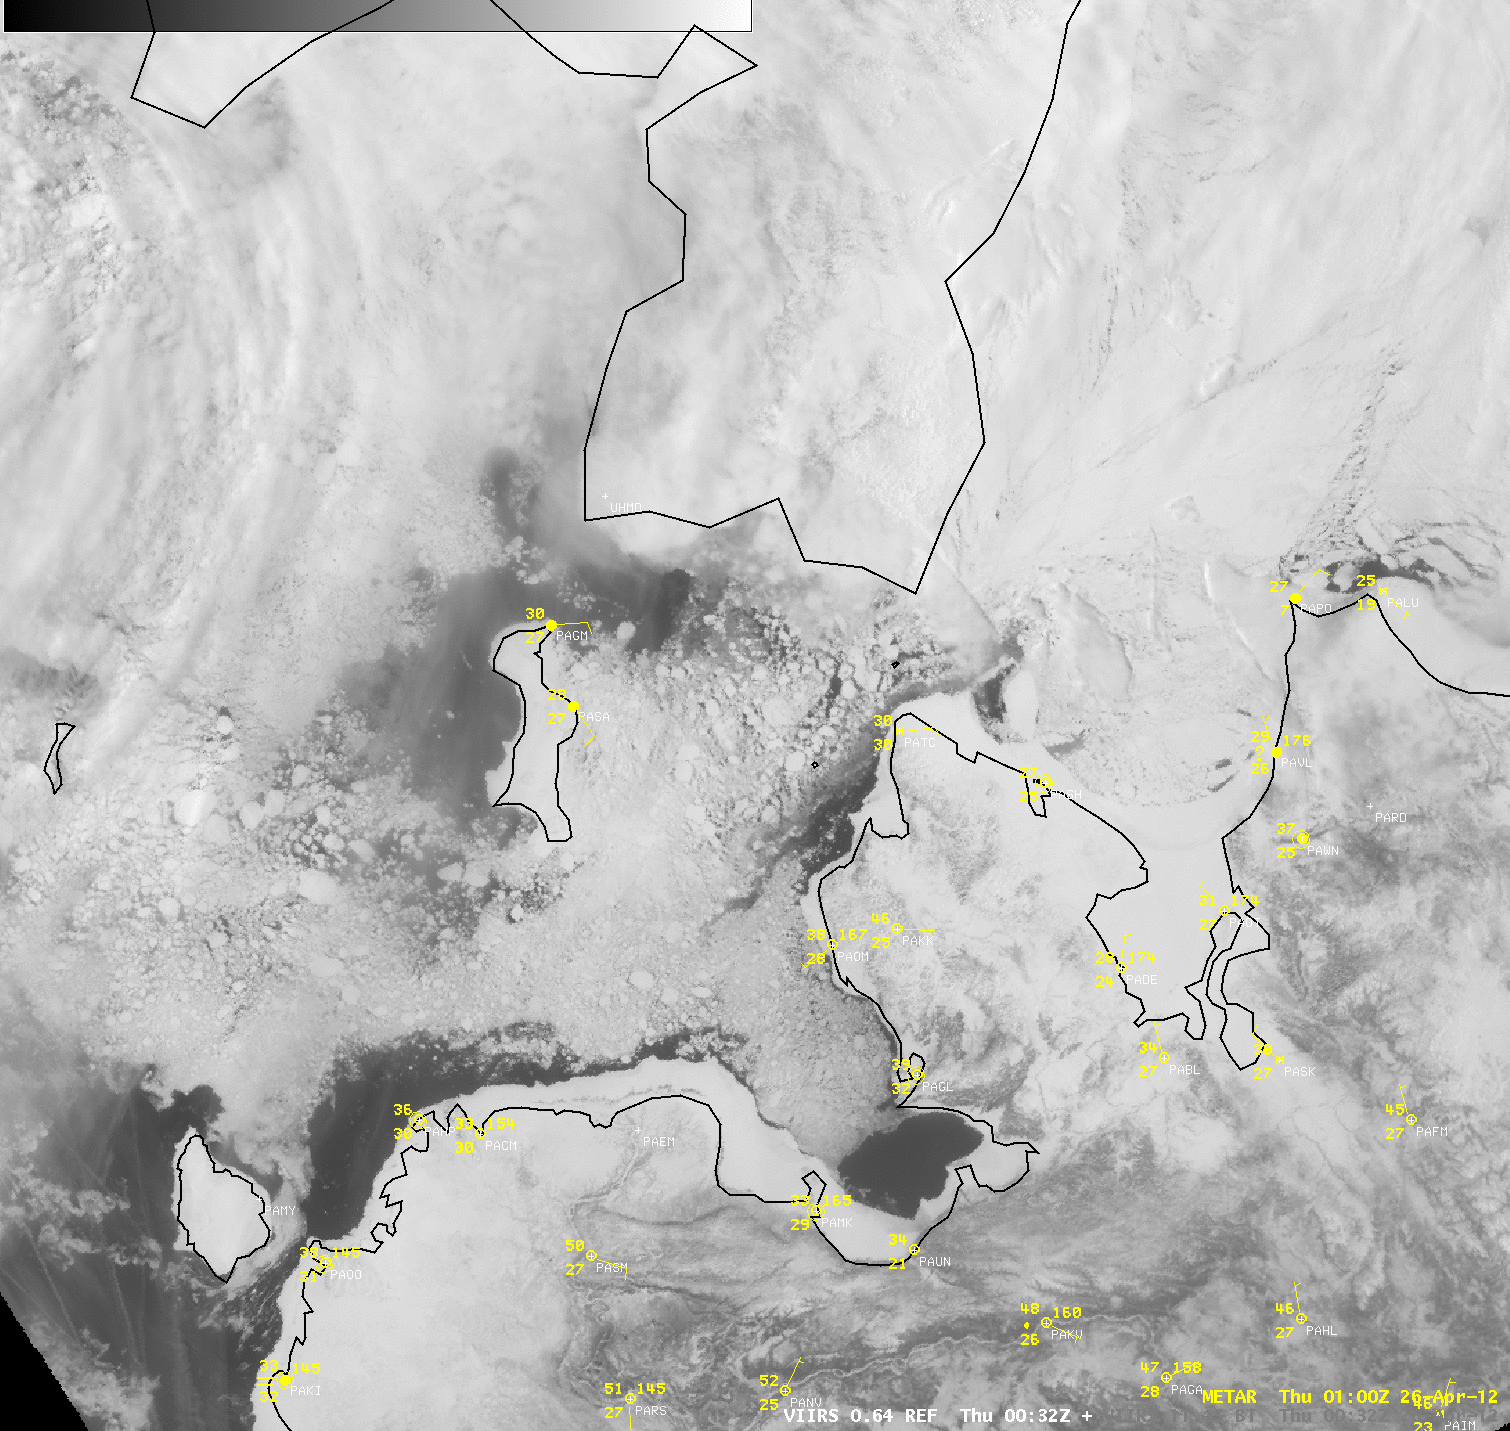 Suomi NPP VIIRS 0.64 Âµm visible channel + 1.61 Âµm near-IR channel images